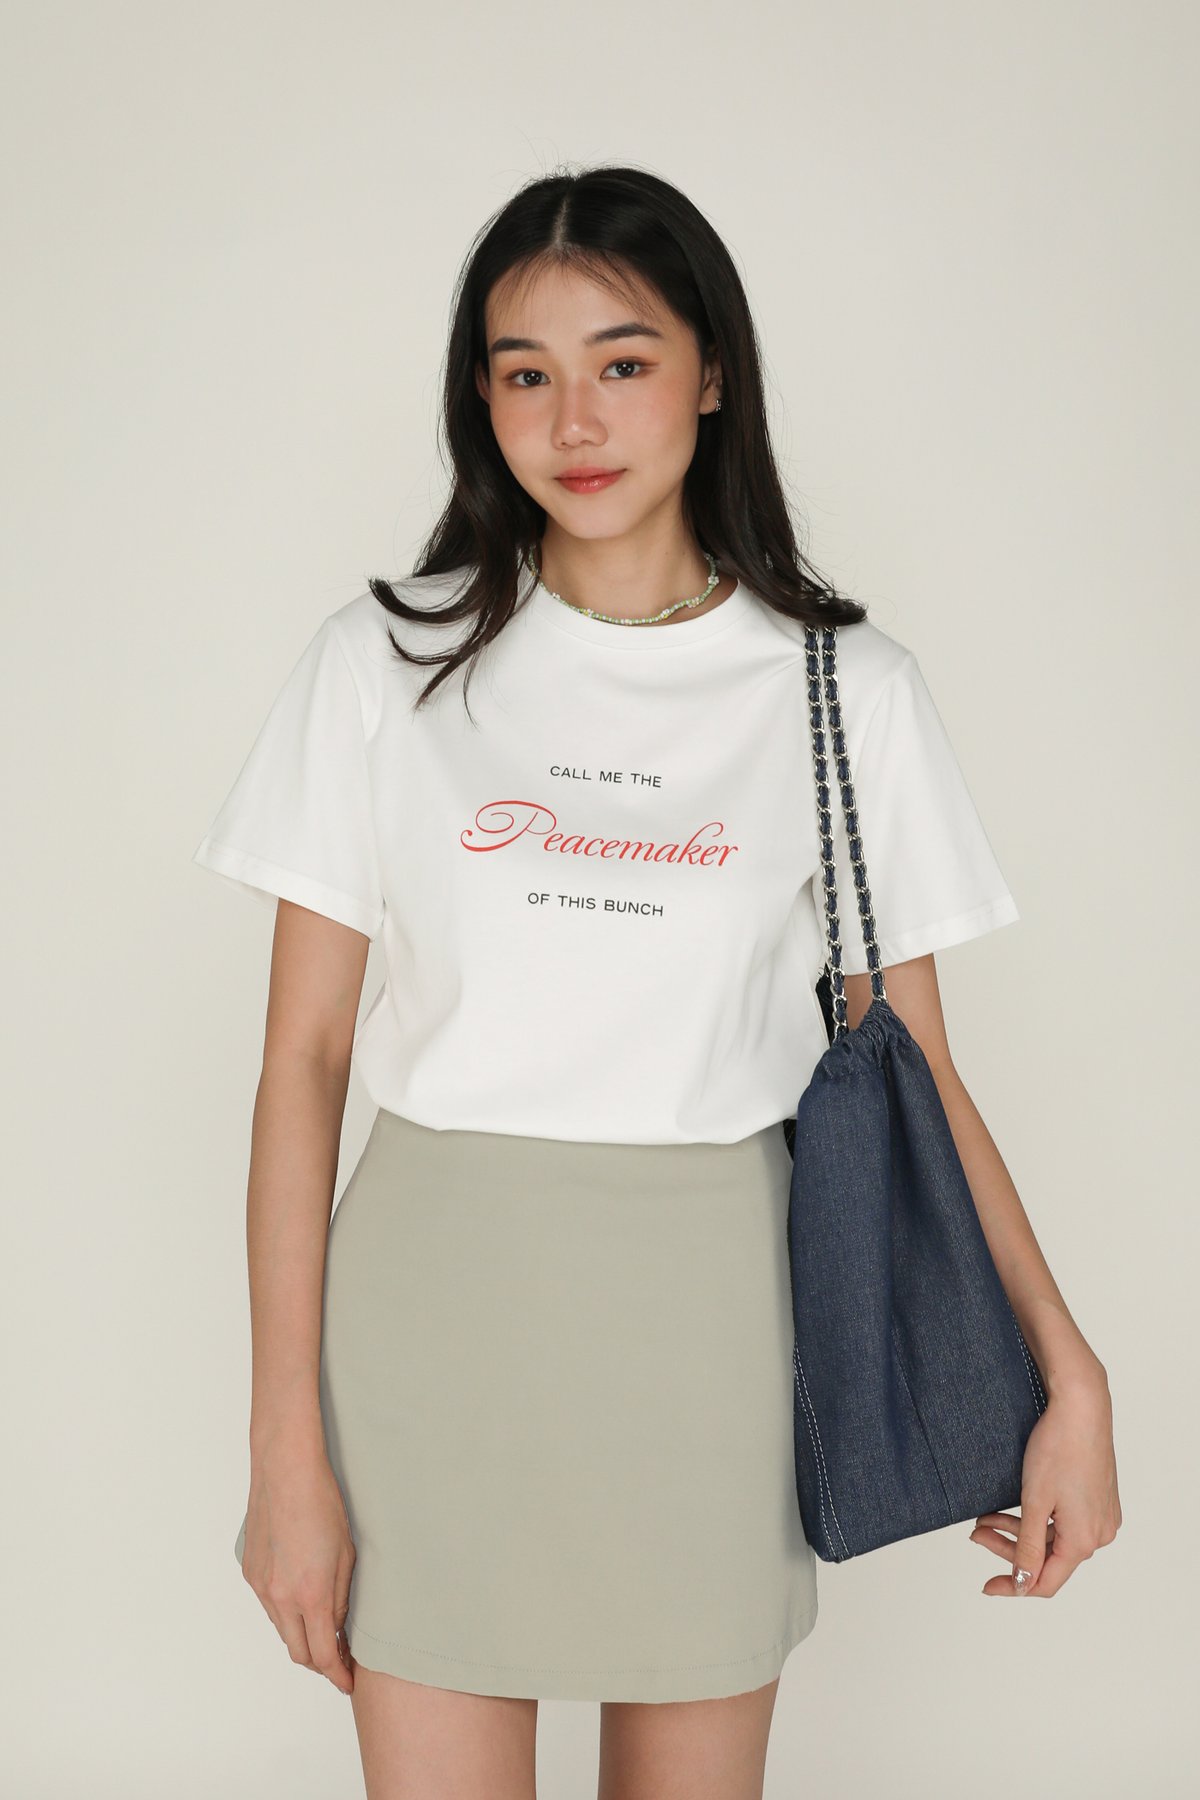 Personali-Tees - Peacemaker (White)